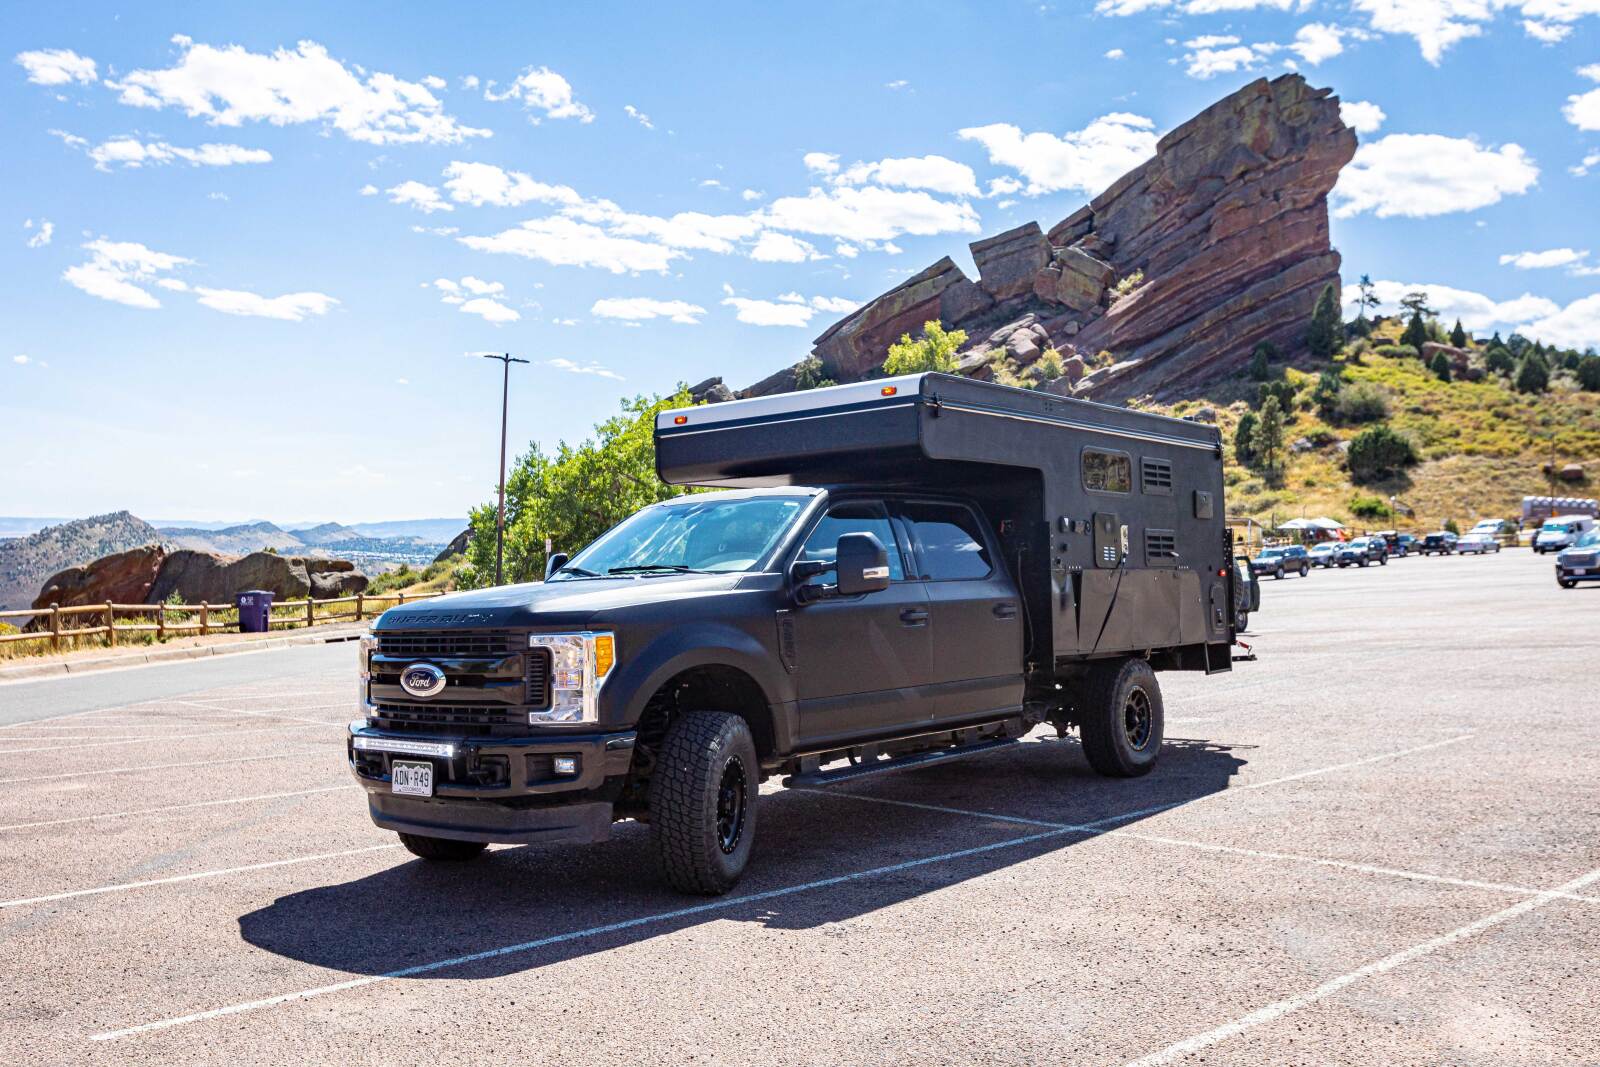 For Sale: 2017 F350 with Forest River Palomino Backpack Camper - $50,000 - photo1